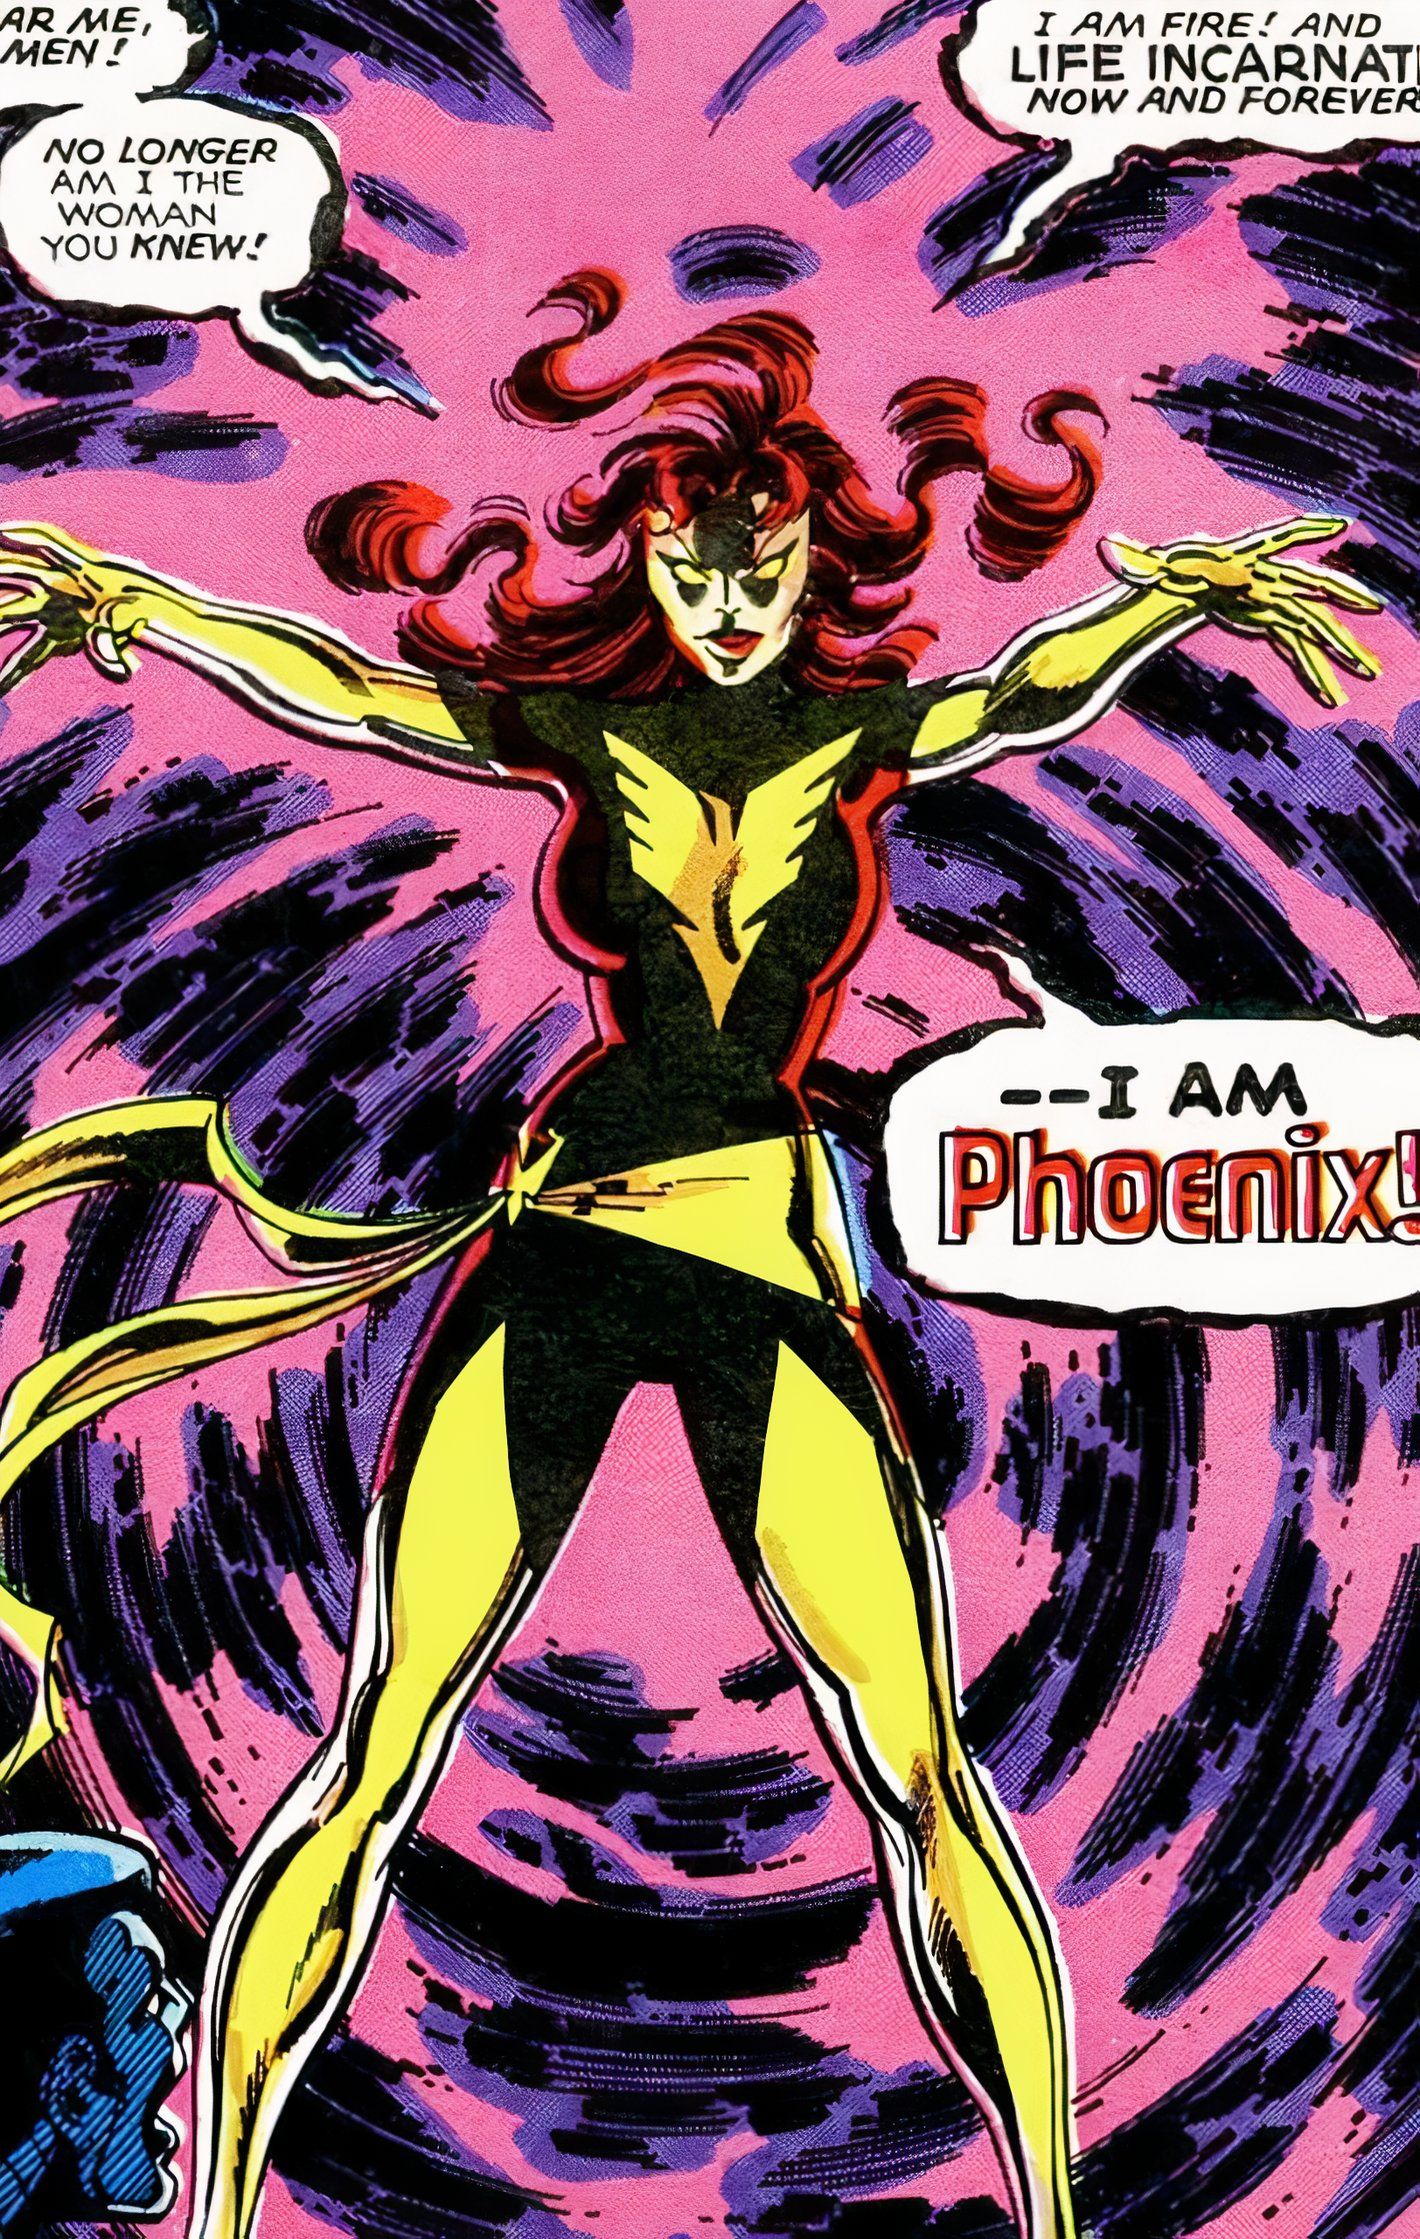 Jean Grey declaring herself Phoenix for the first time, surrounded by swirling purple and black energy.